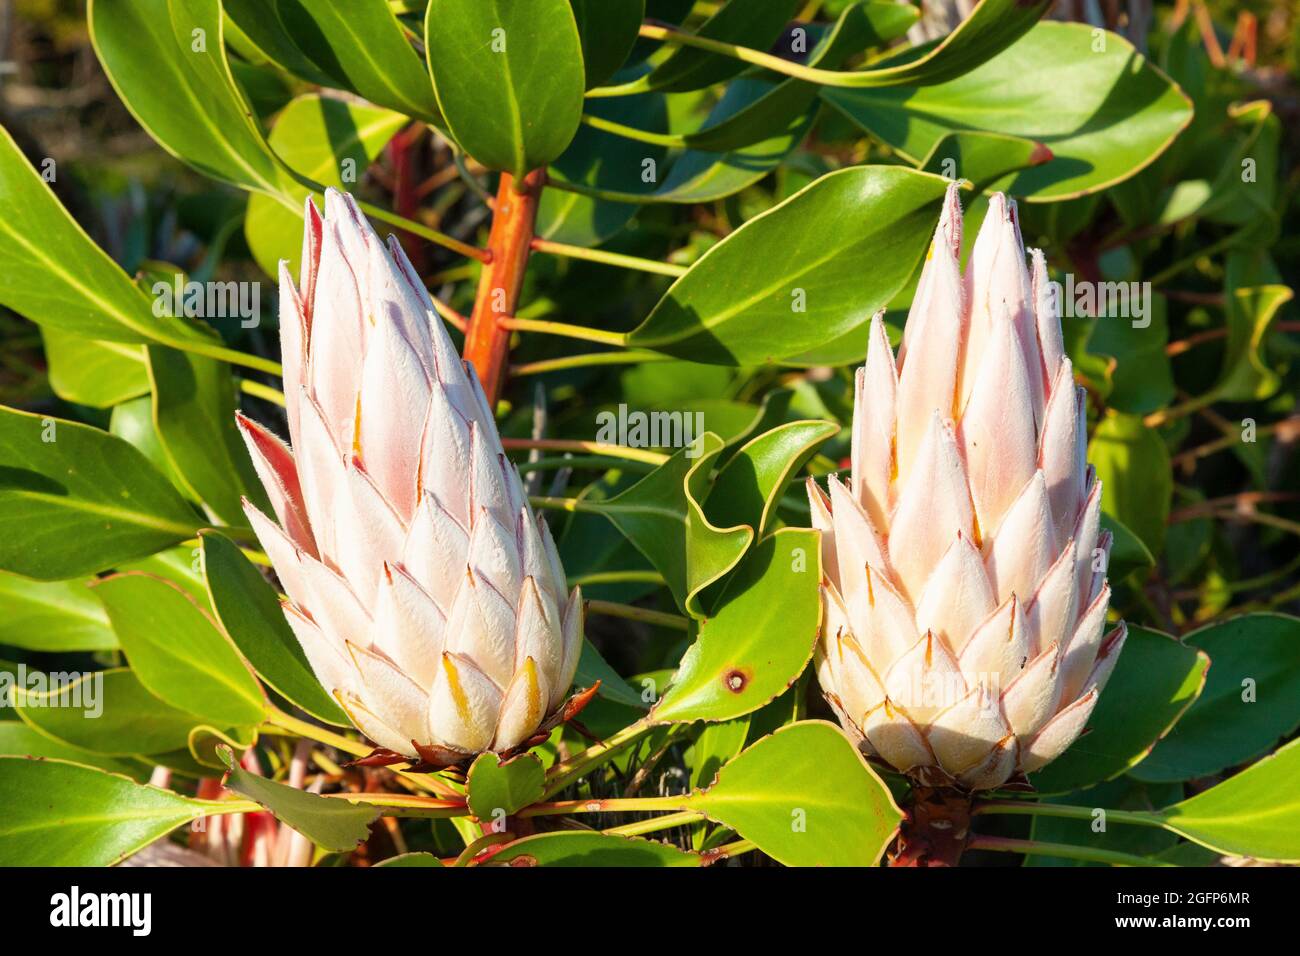 Buds of the King Protea or Giant Protea (Protea cynaroides) Botriver, Western Cape, South Africa Stock Photo